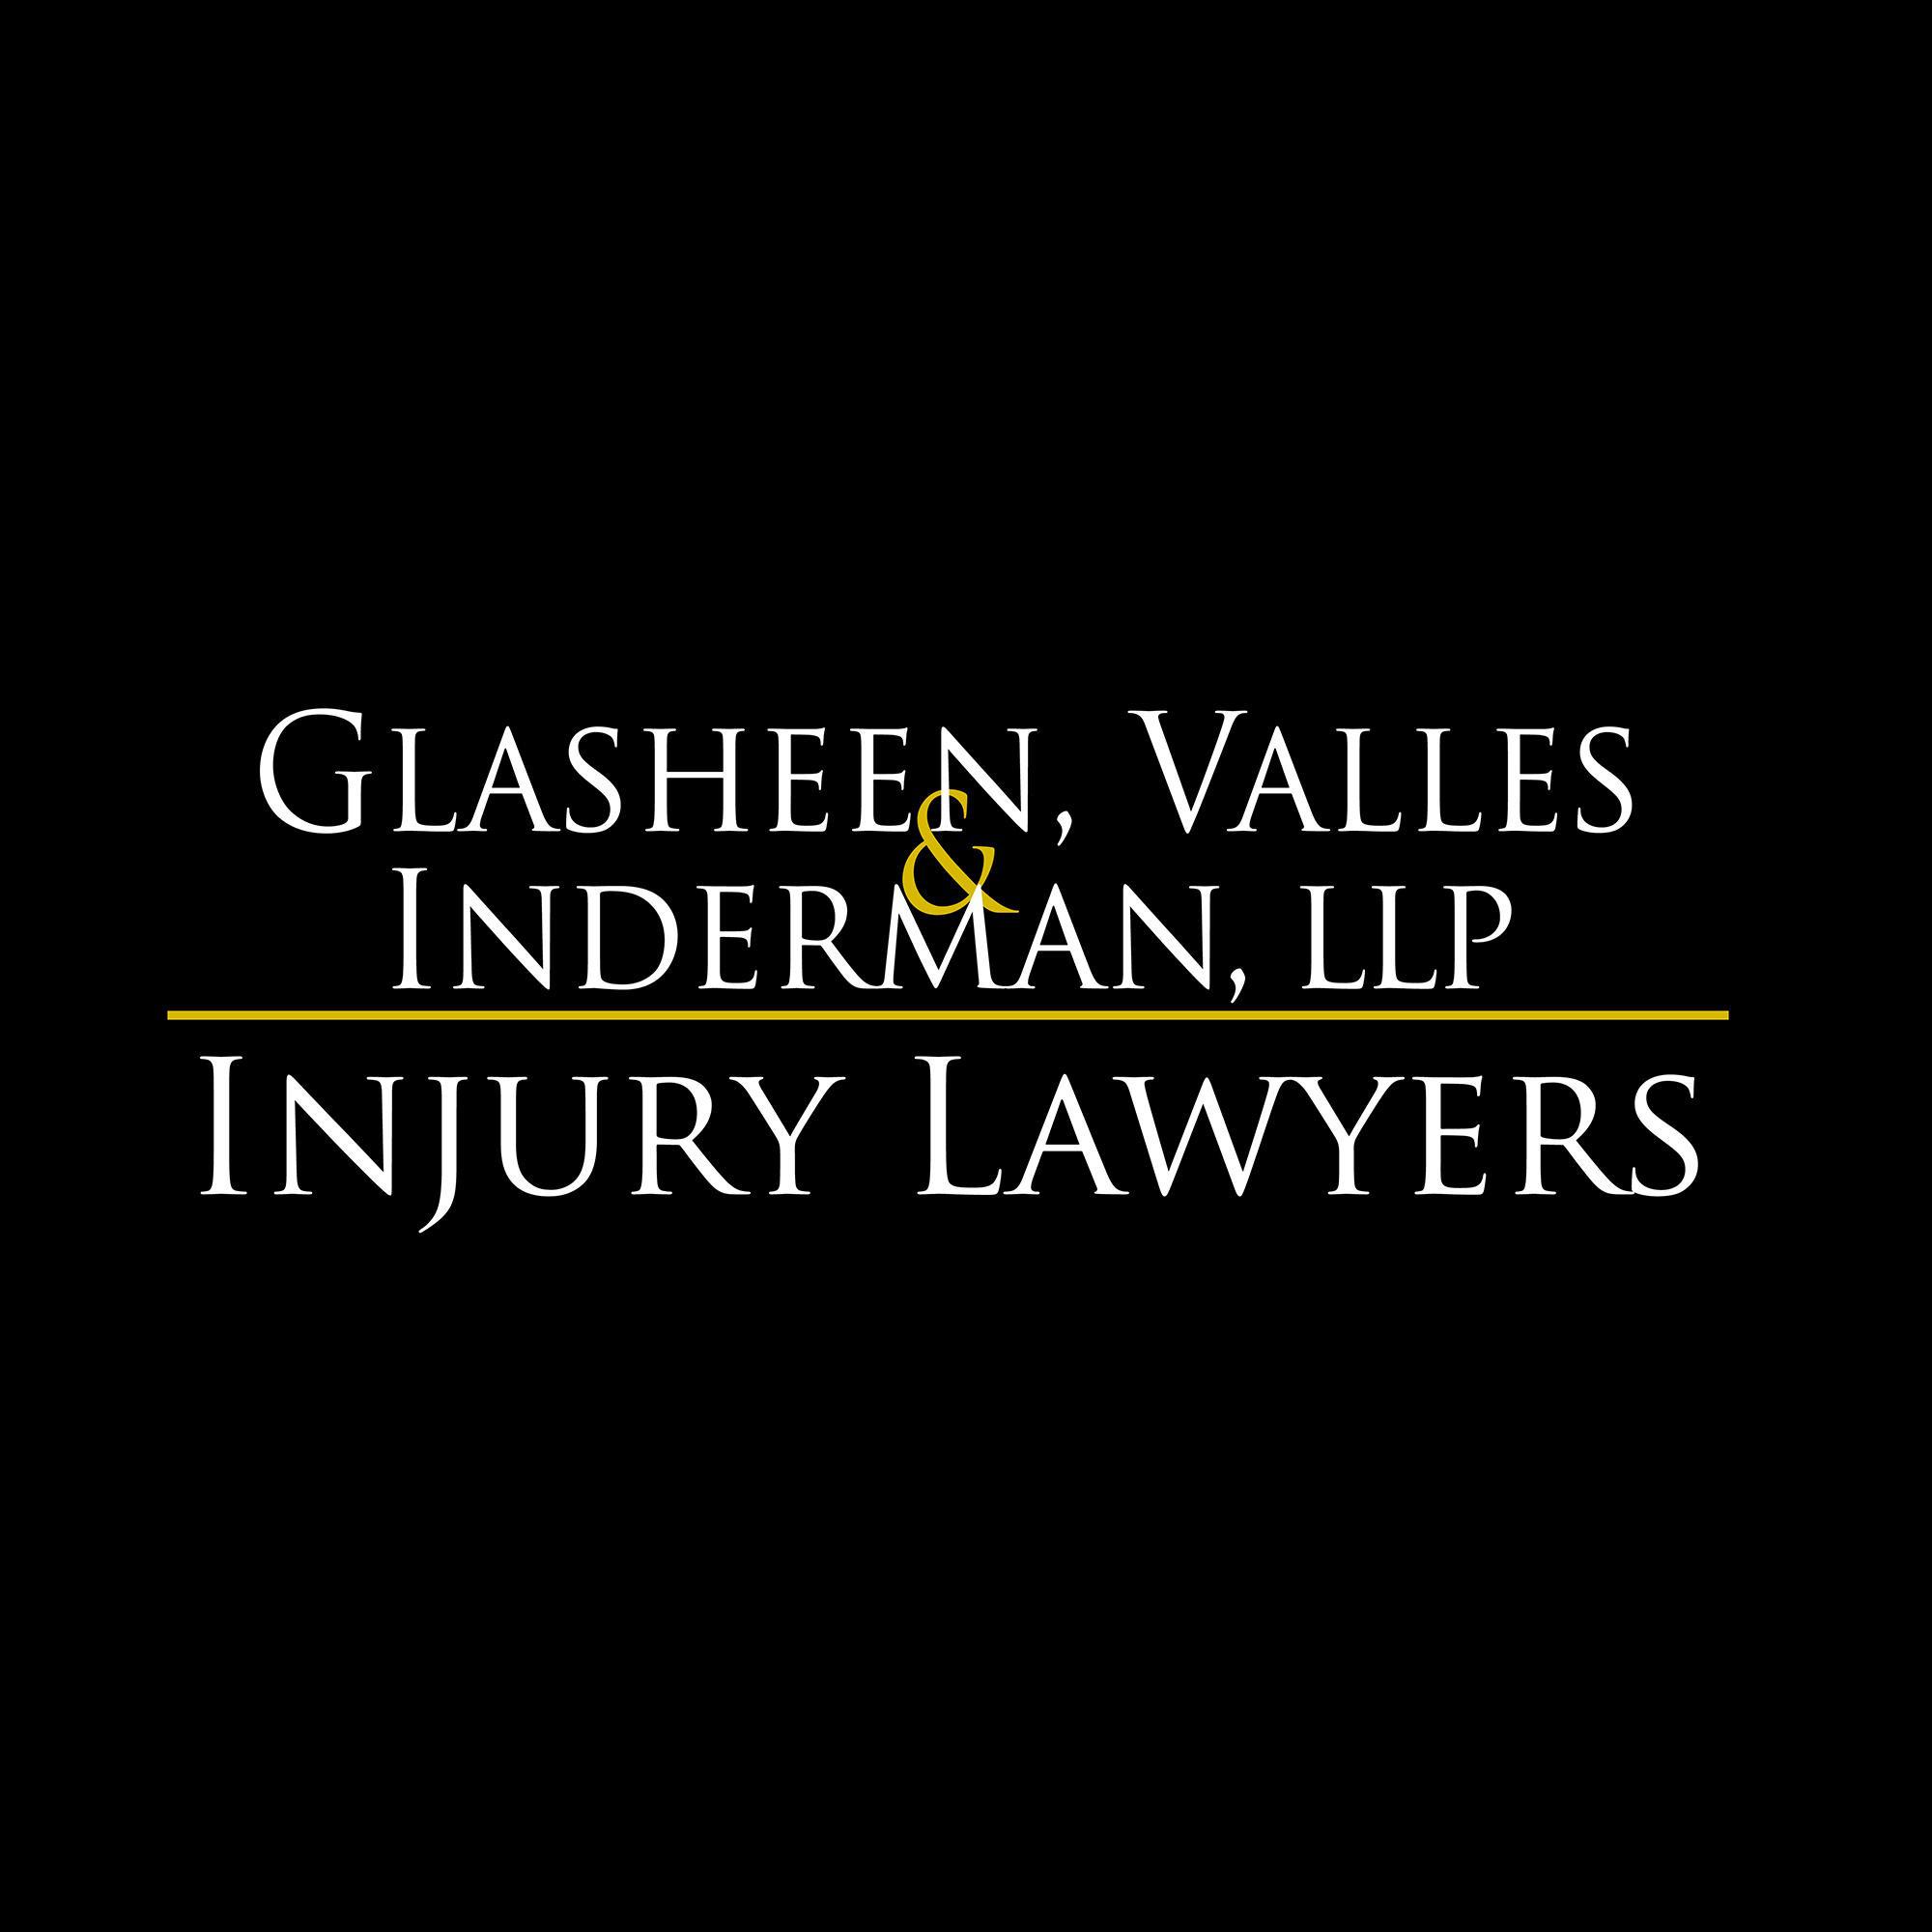 Glasheen, Valles & Inderman Injury Lawyers - Hobbs, NM 88240 - (575)665-4700 | ShowMeLocal.com